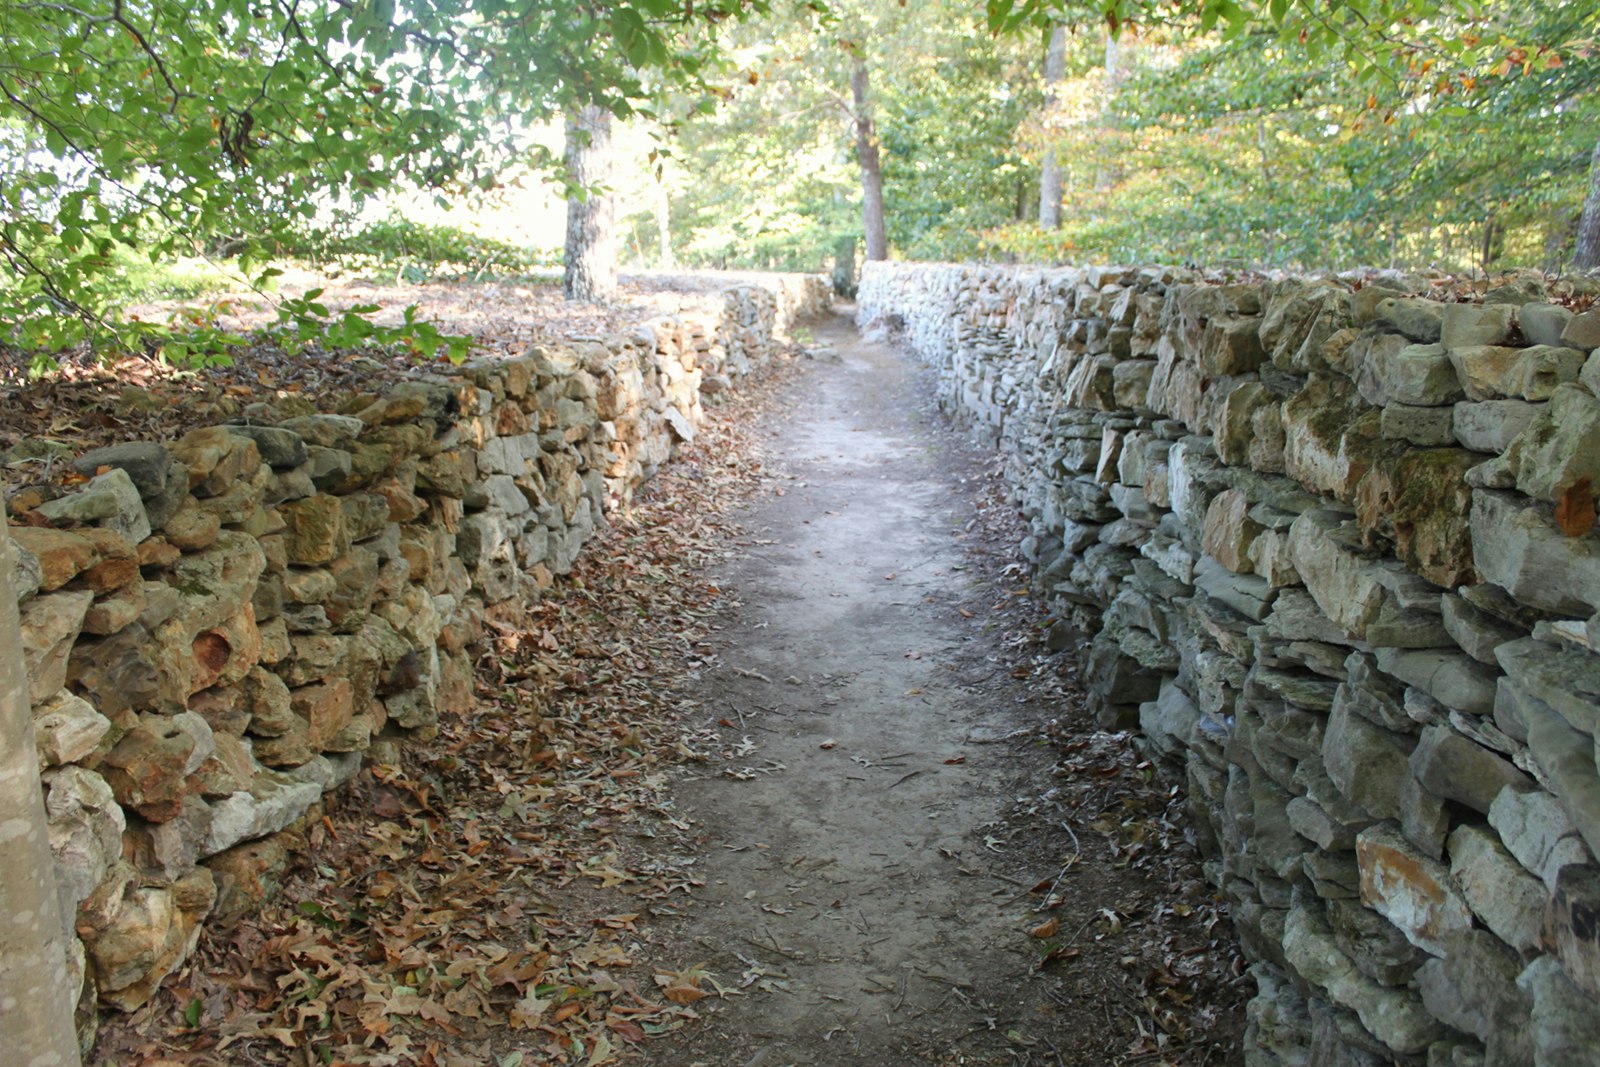 Low-angle view of a warm golden tan limestone wall outlining a dirt path with trees overhead